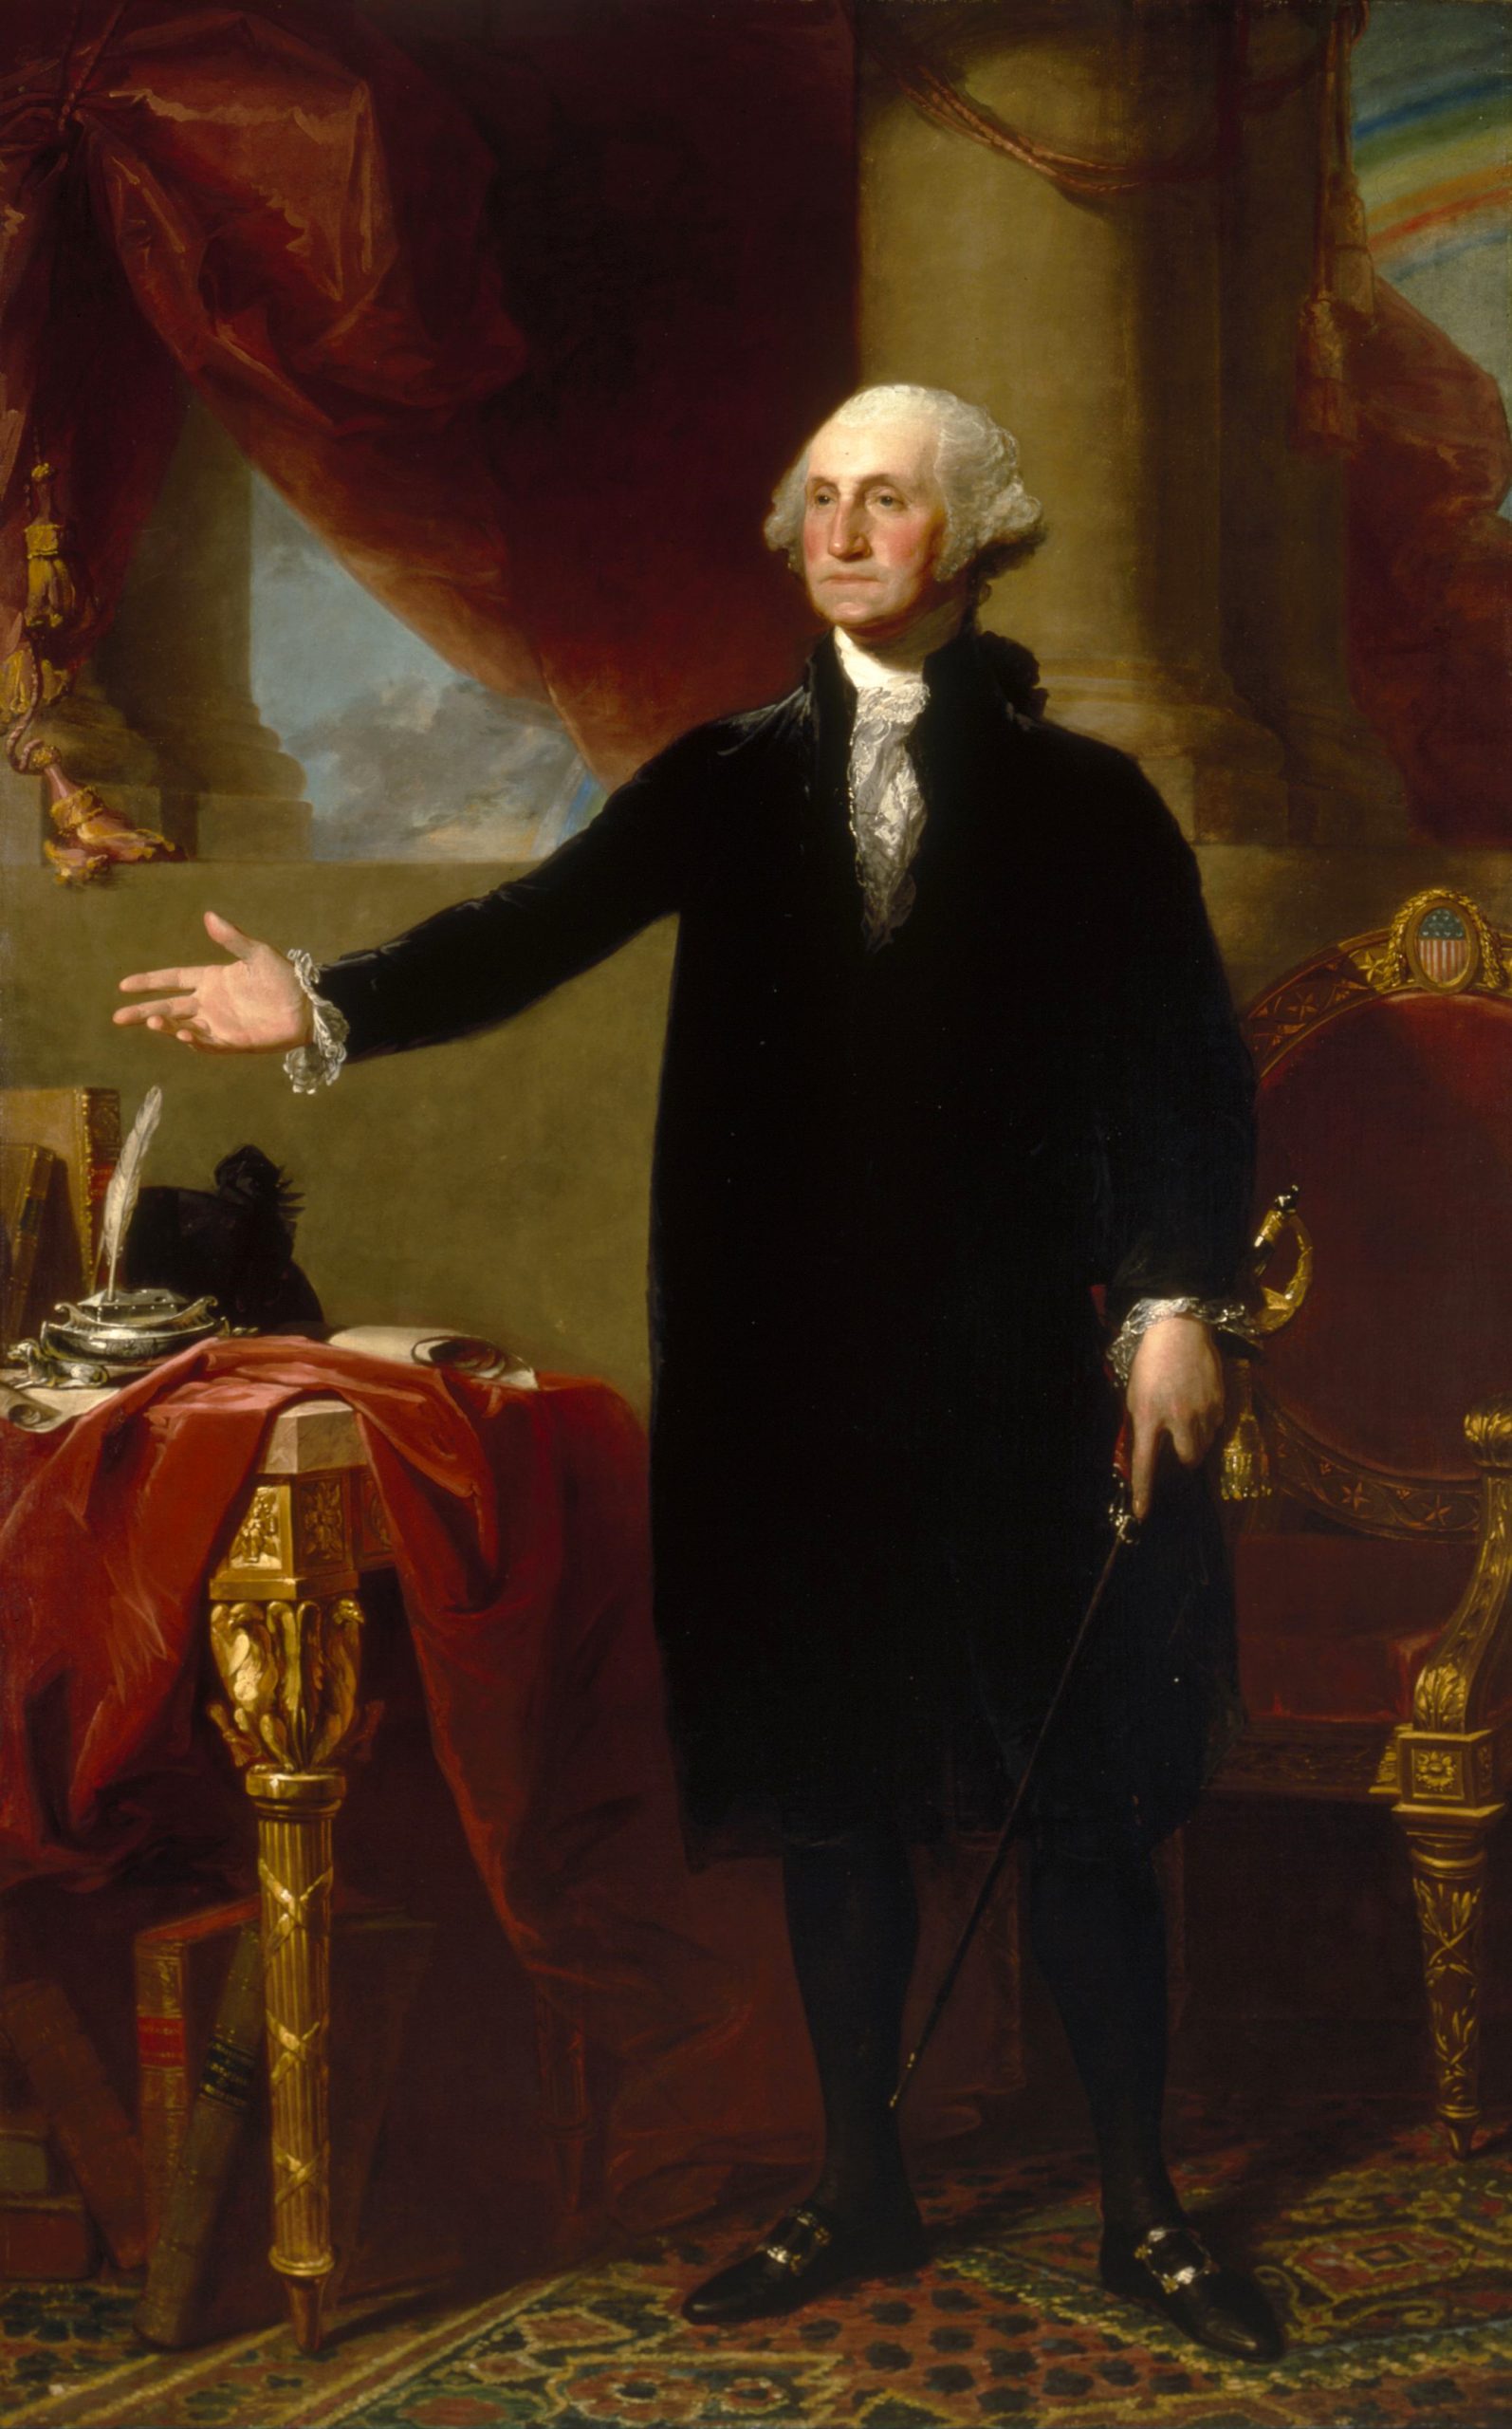 Gilbert Stuart painted the most recognized image of George Washington before there were photographs.